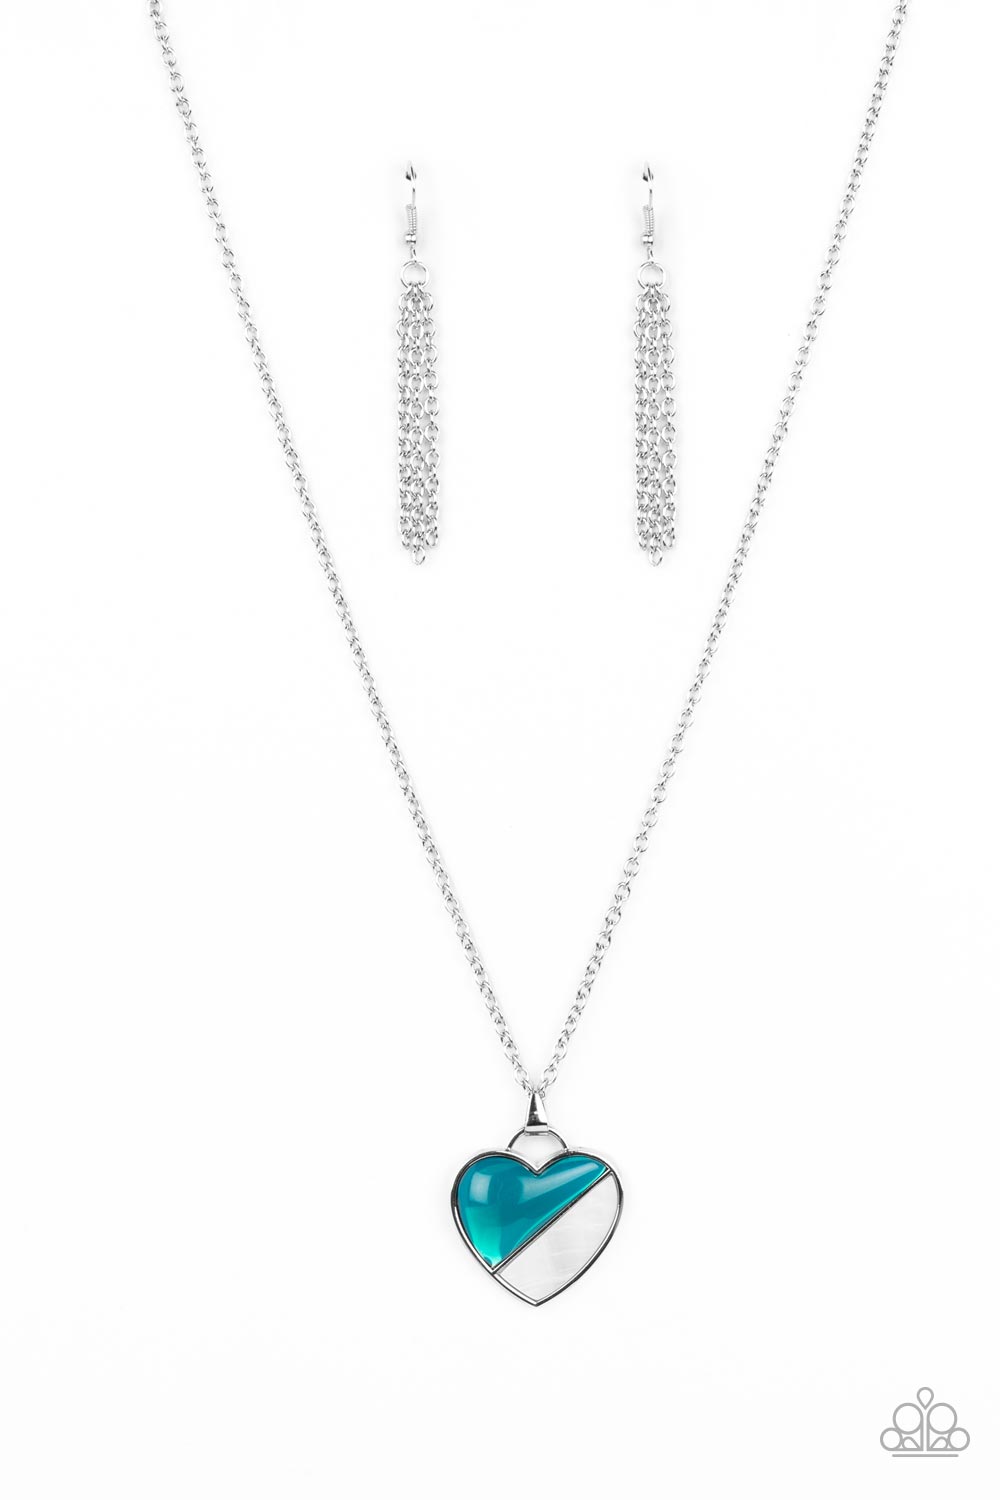 Nautical Romance Blue Heart Necklace - Paparazzi Accessories- lightbox - CarasShop.com - $5 Jewelry by Cara Jewels